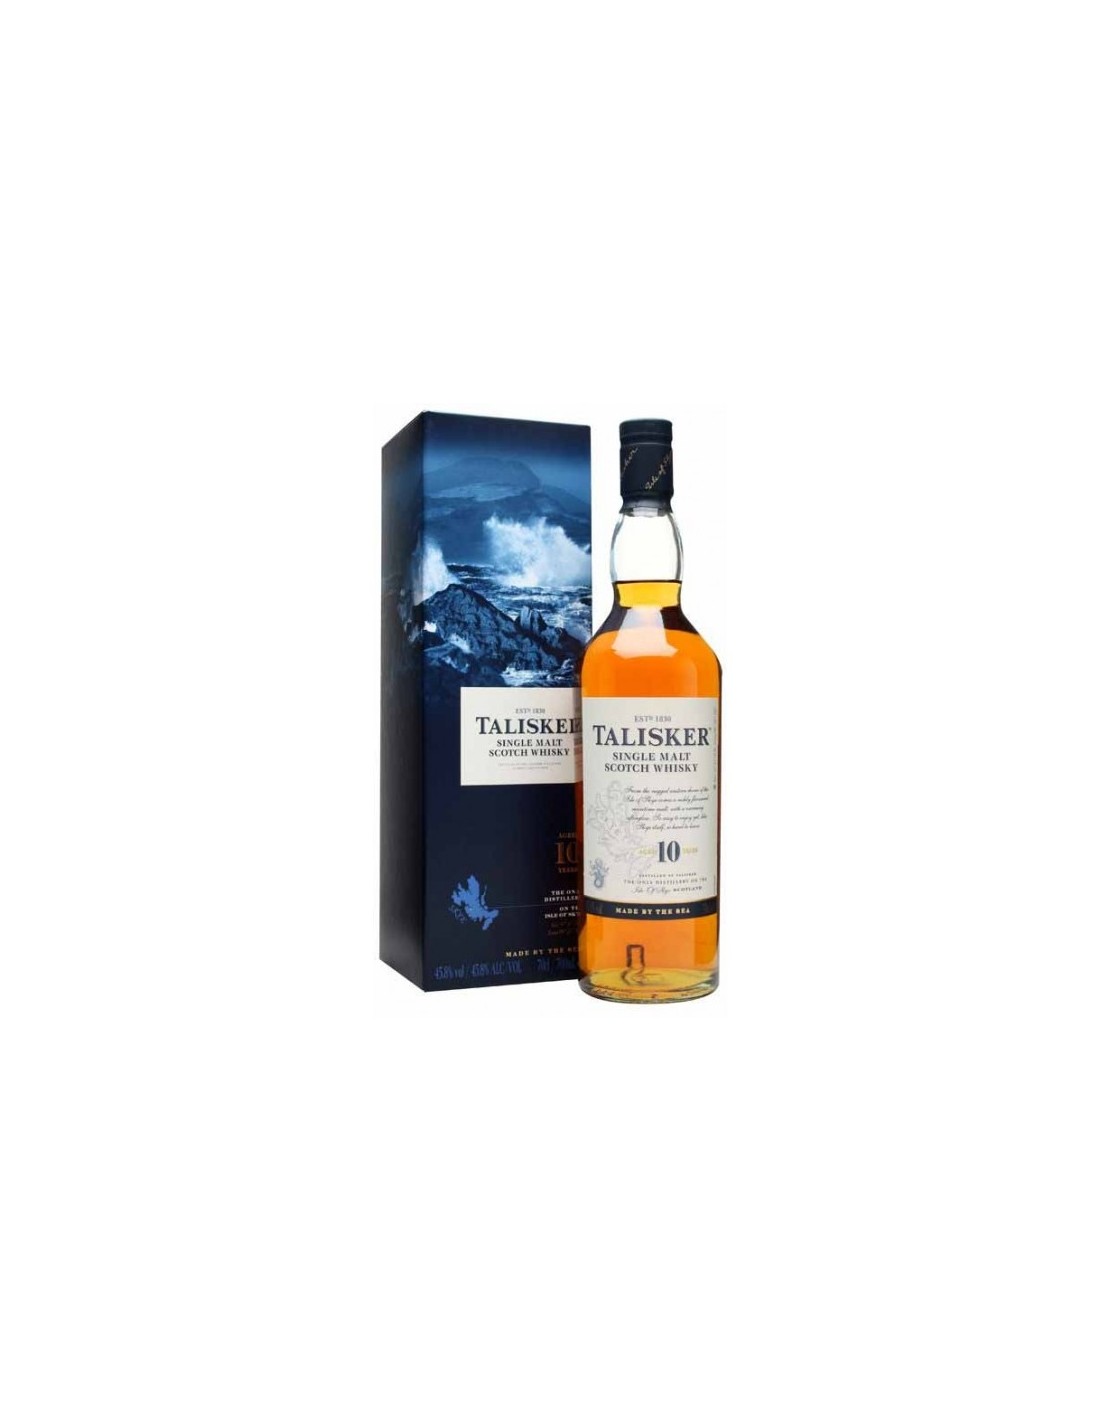 Whisky Talisker 10 Years, 0.7L, 45.8% alc., Scotia alcooldiscount.ro